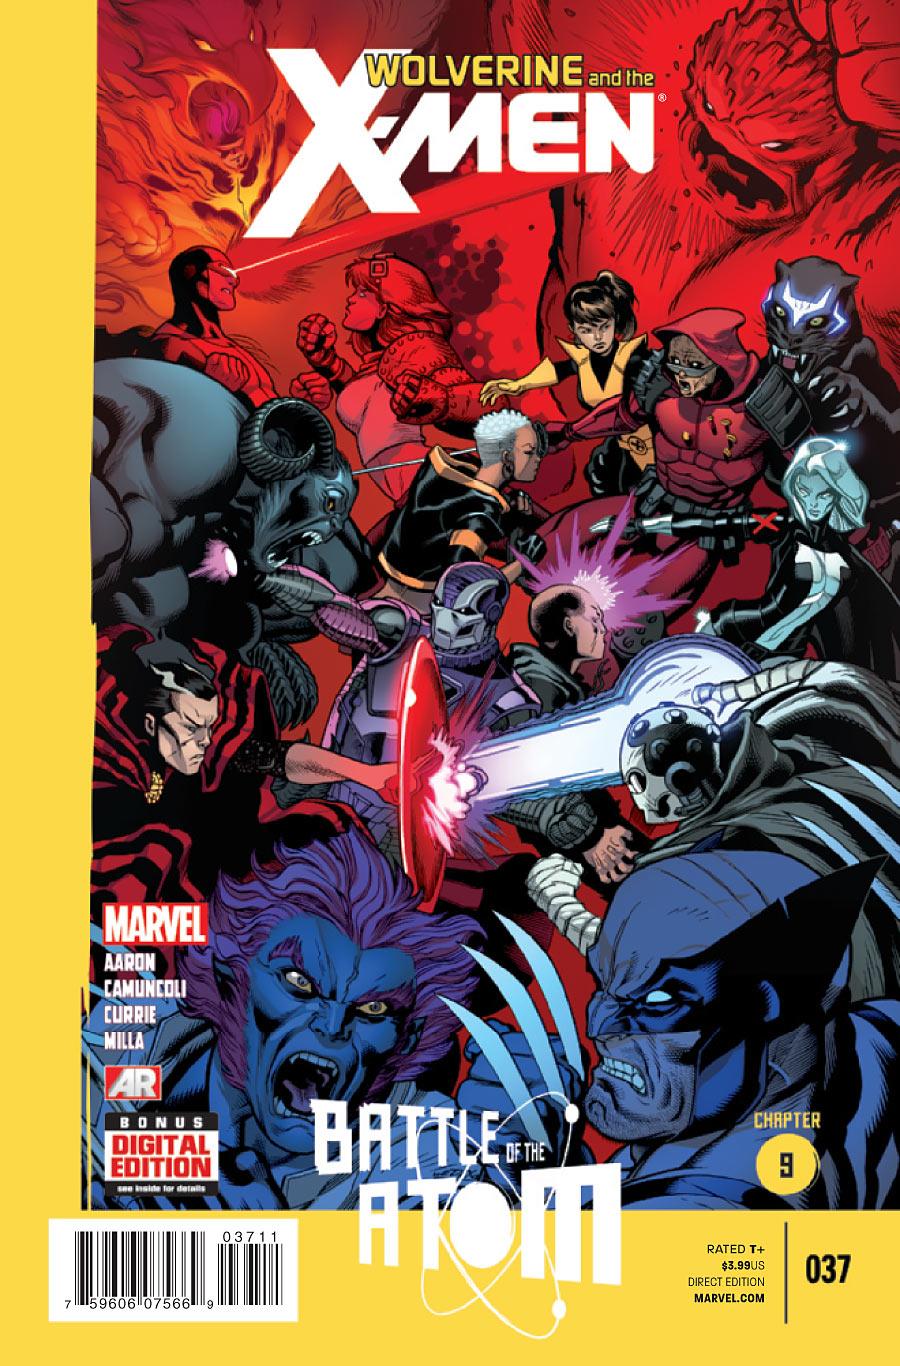 Wolverine and the X-Men Vol. 1 #37